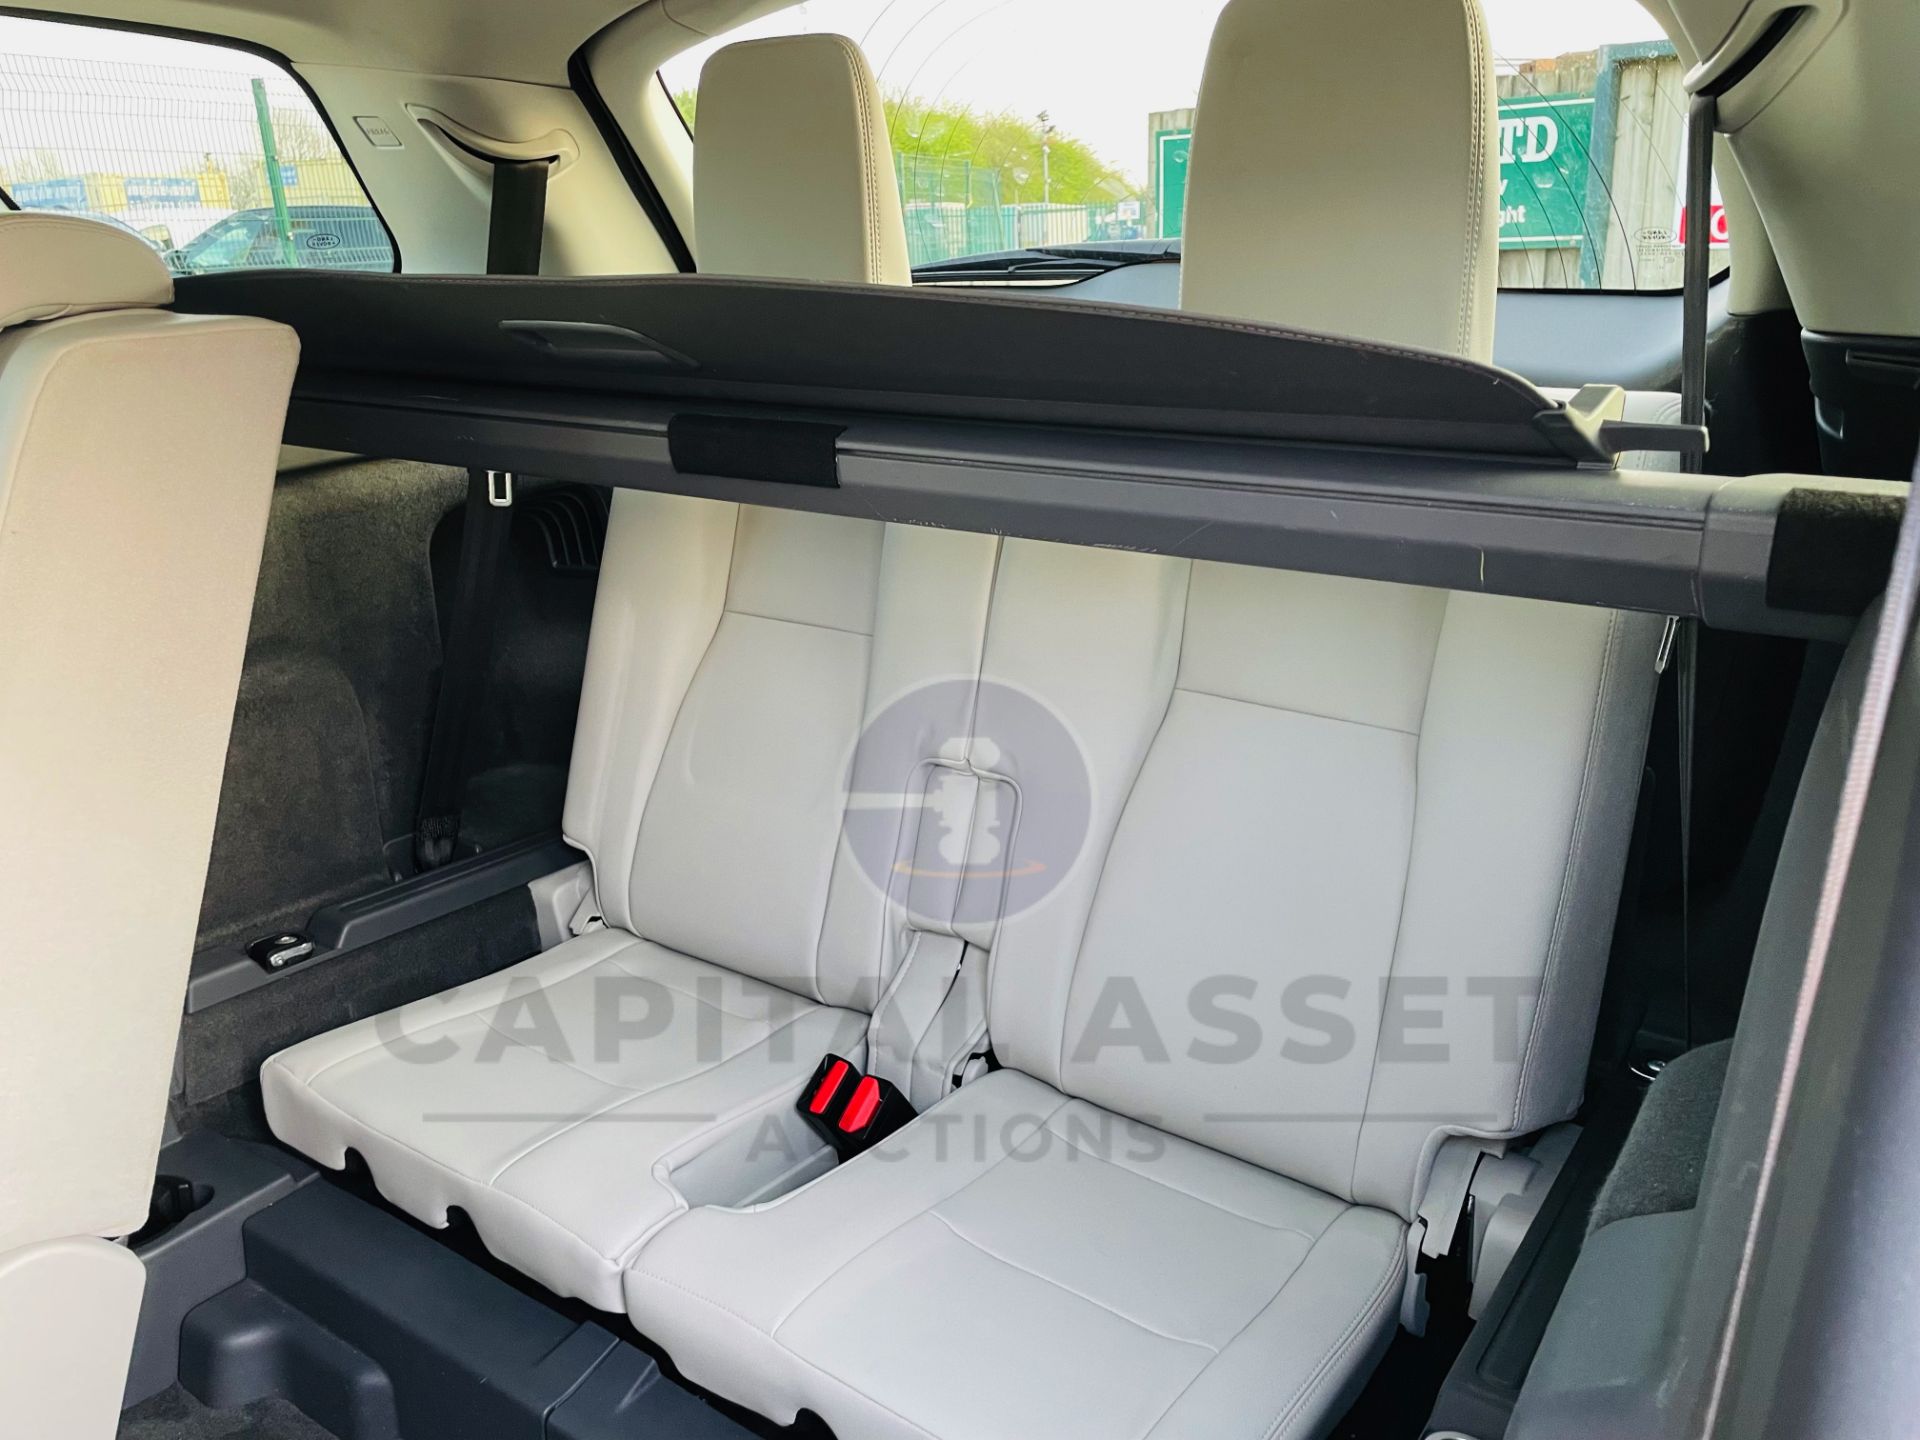 (On Sale) LAND ROVER DISCOVERY SPORT *SE TECH* 7 SEATER SUV (2018 - EURO 6) TD4 - AUTO *LOW MILEAGE* - Image 34 of 35